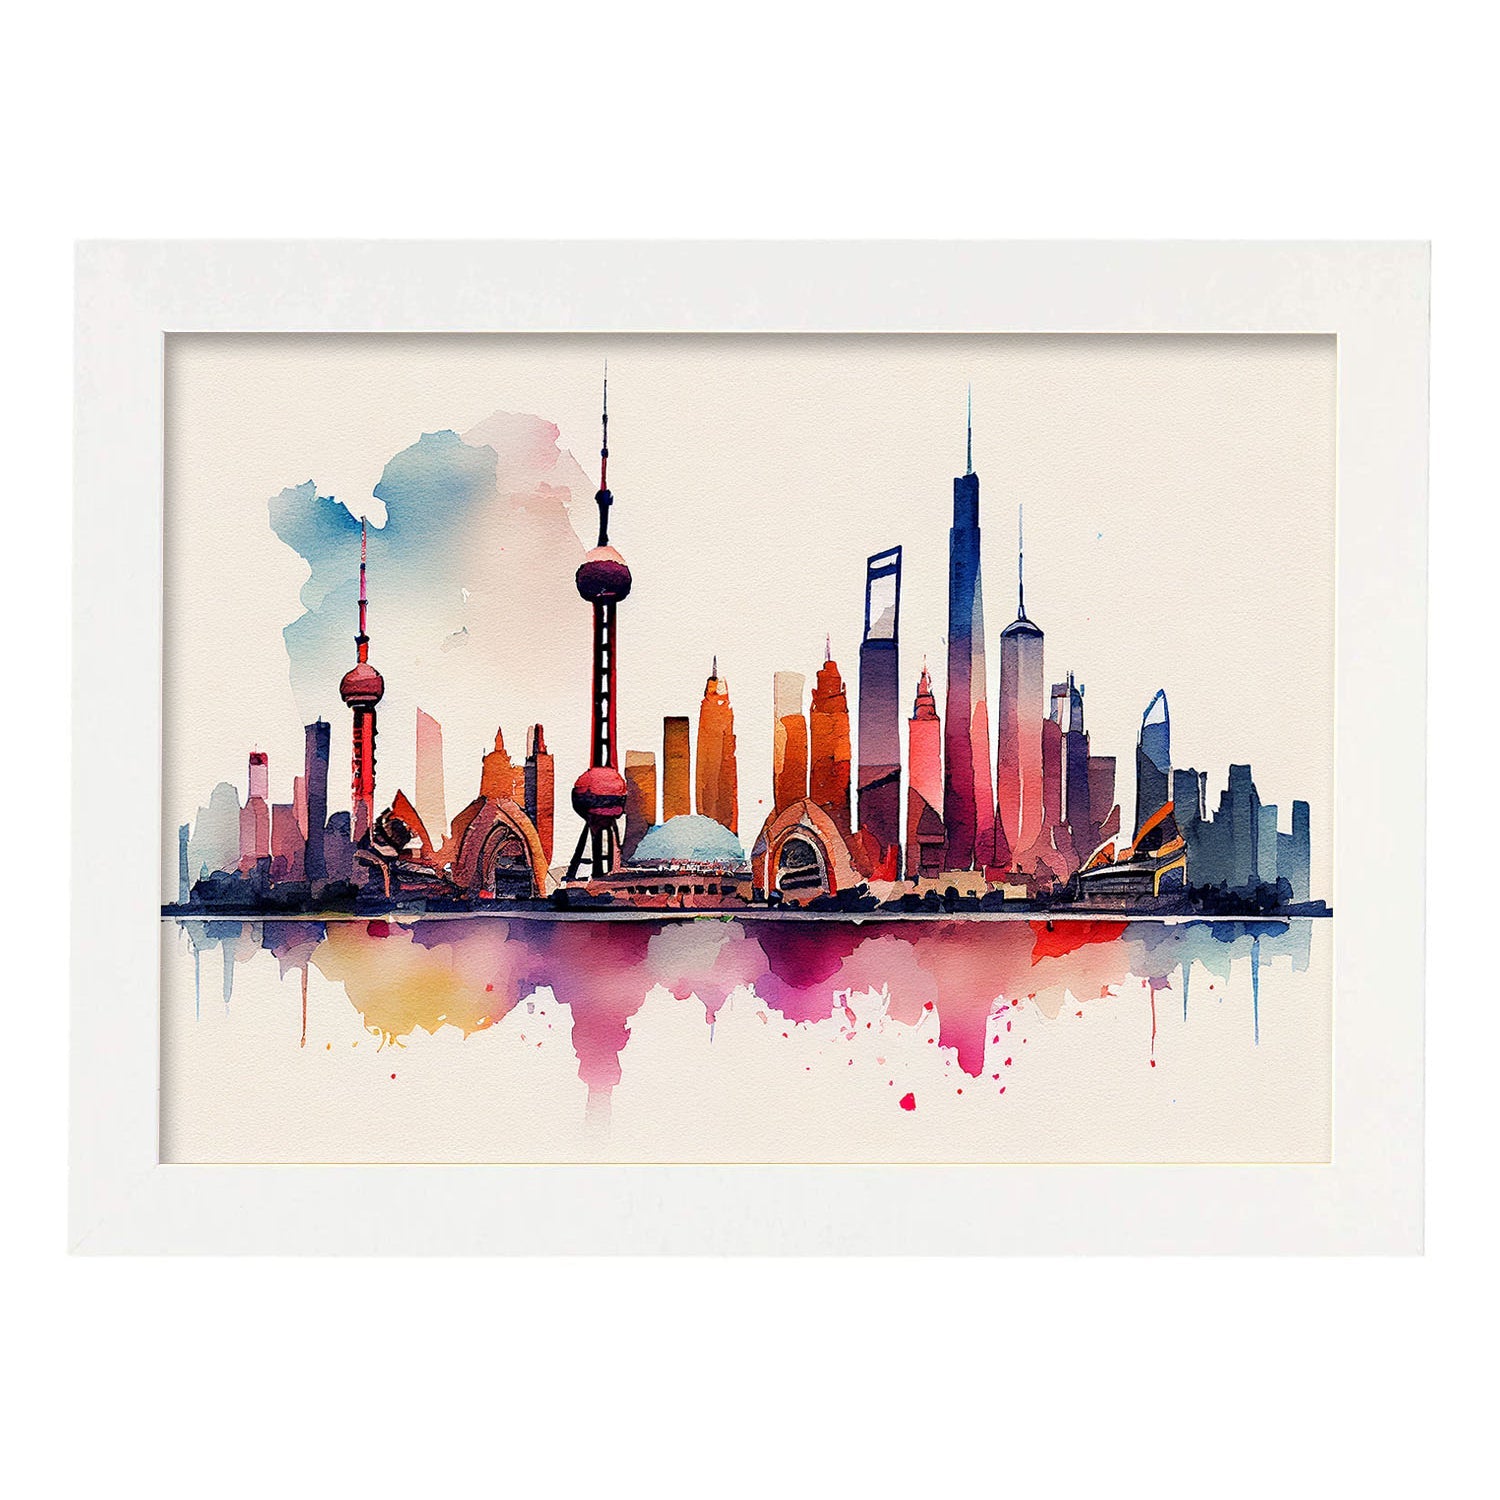 Nacnic watercolor of a skyline of the city of Shanghai_3. Aesthetic Wall Art Prints for Bedroom or Living Room Design.-Artwork-Nacnic-A4-Marco Blanco-Nacnic Estudio SL